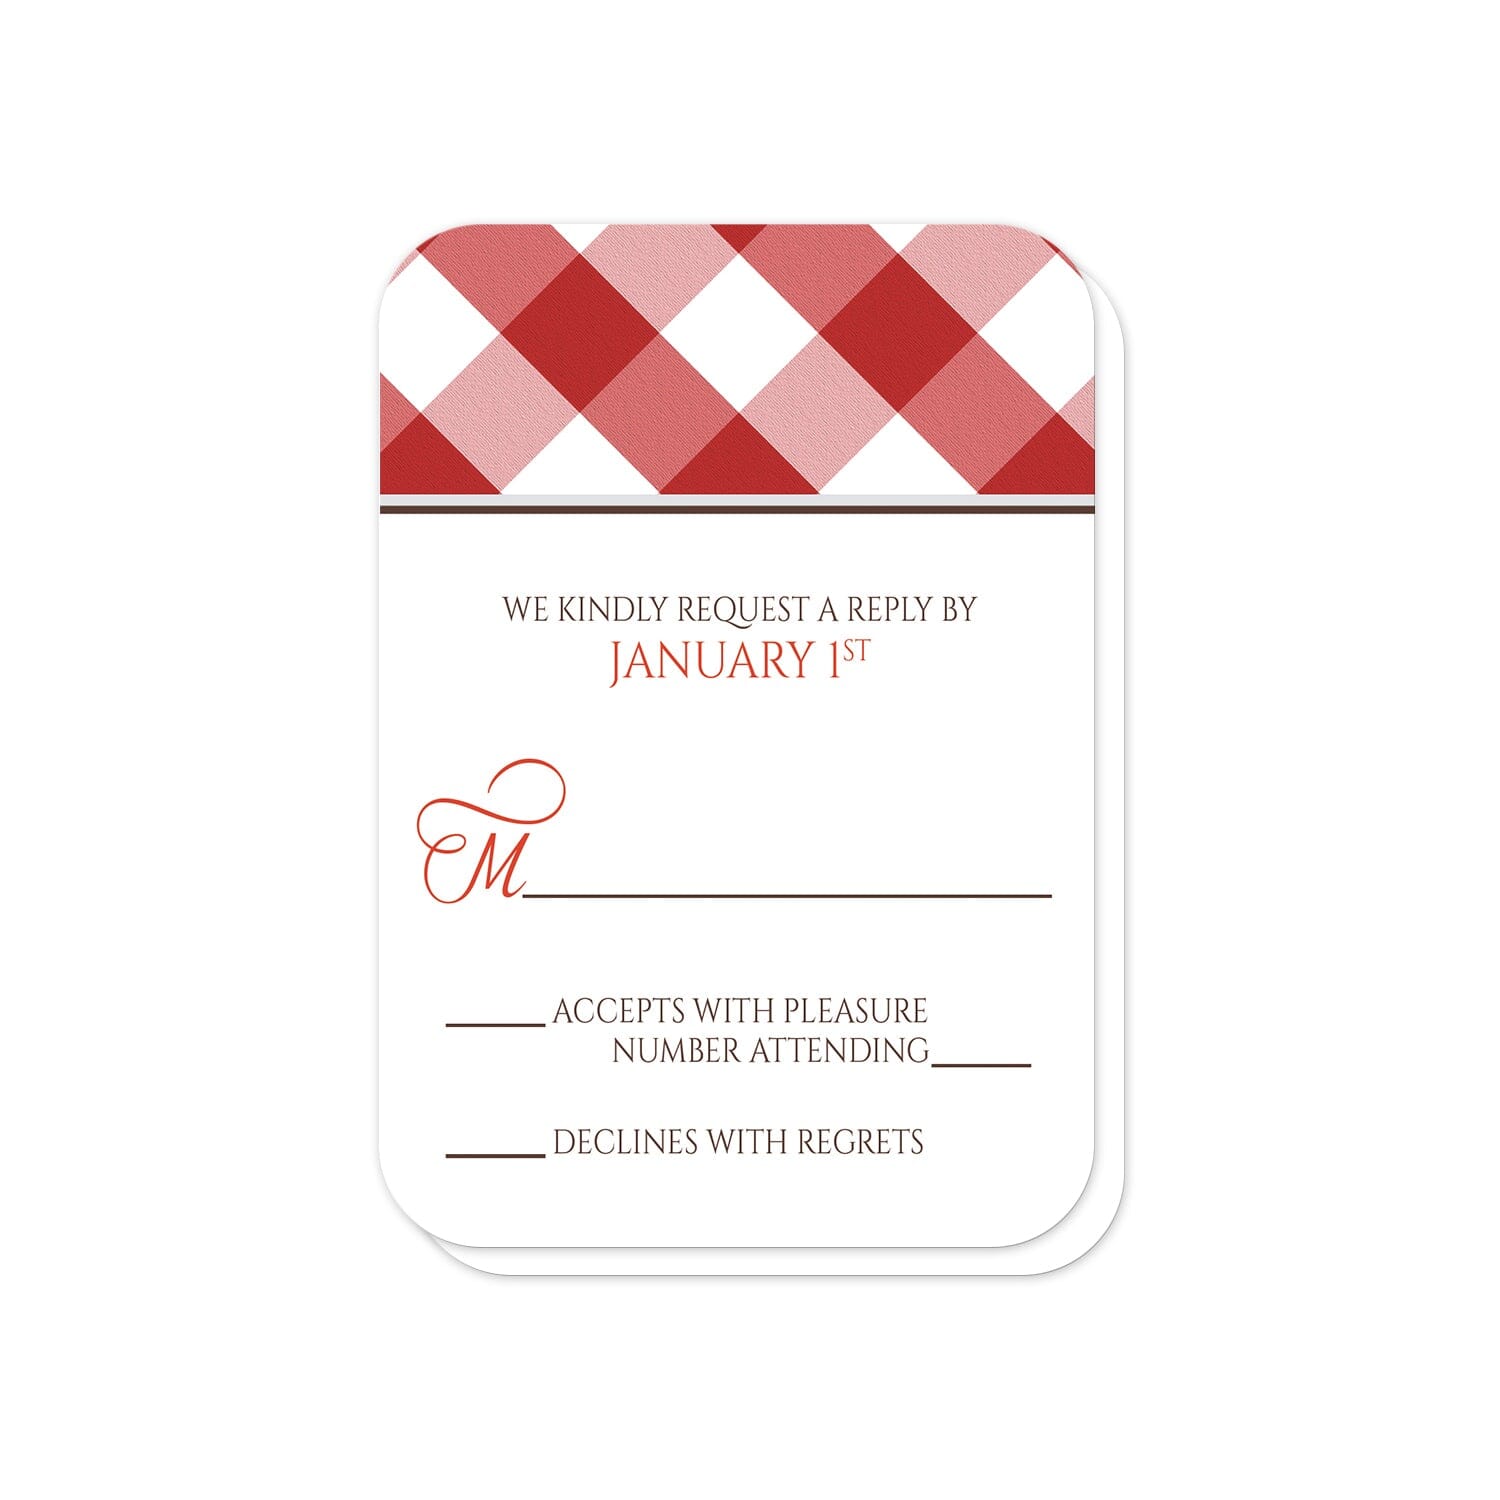 Red Gingham RSVP Cards (with rounded corners) at Artistically Invited.